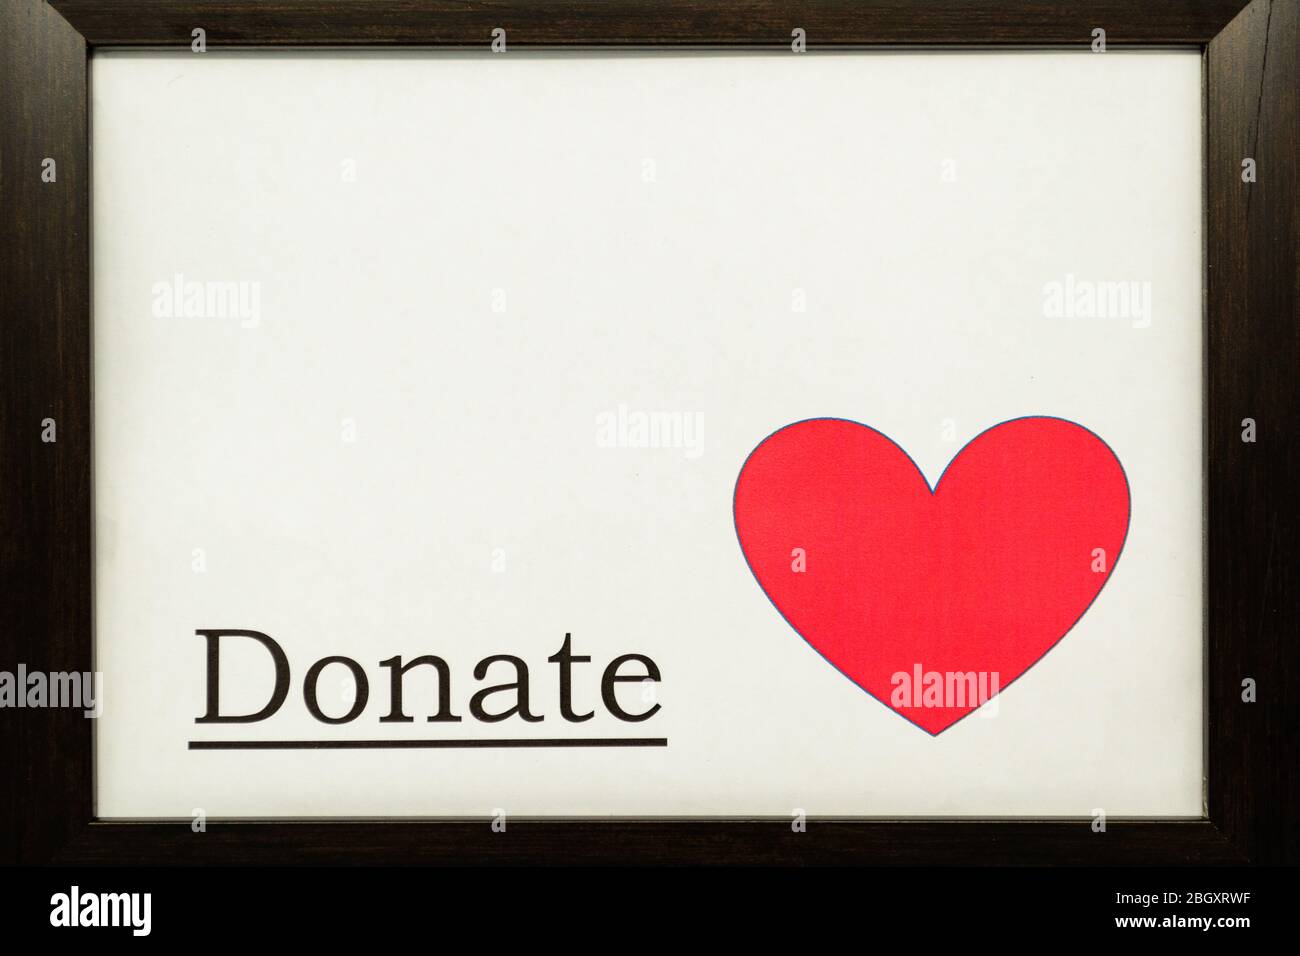 The word 'Donate' on a white background next to a red heart Stock Photo